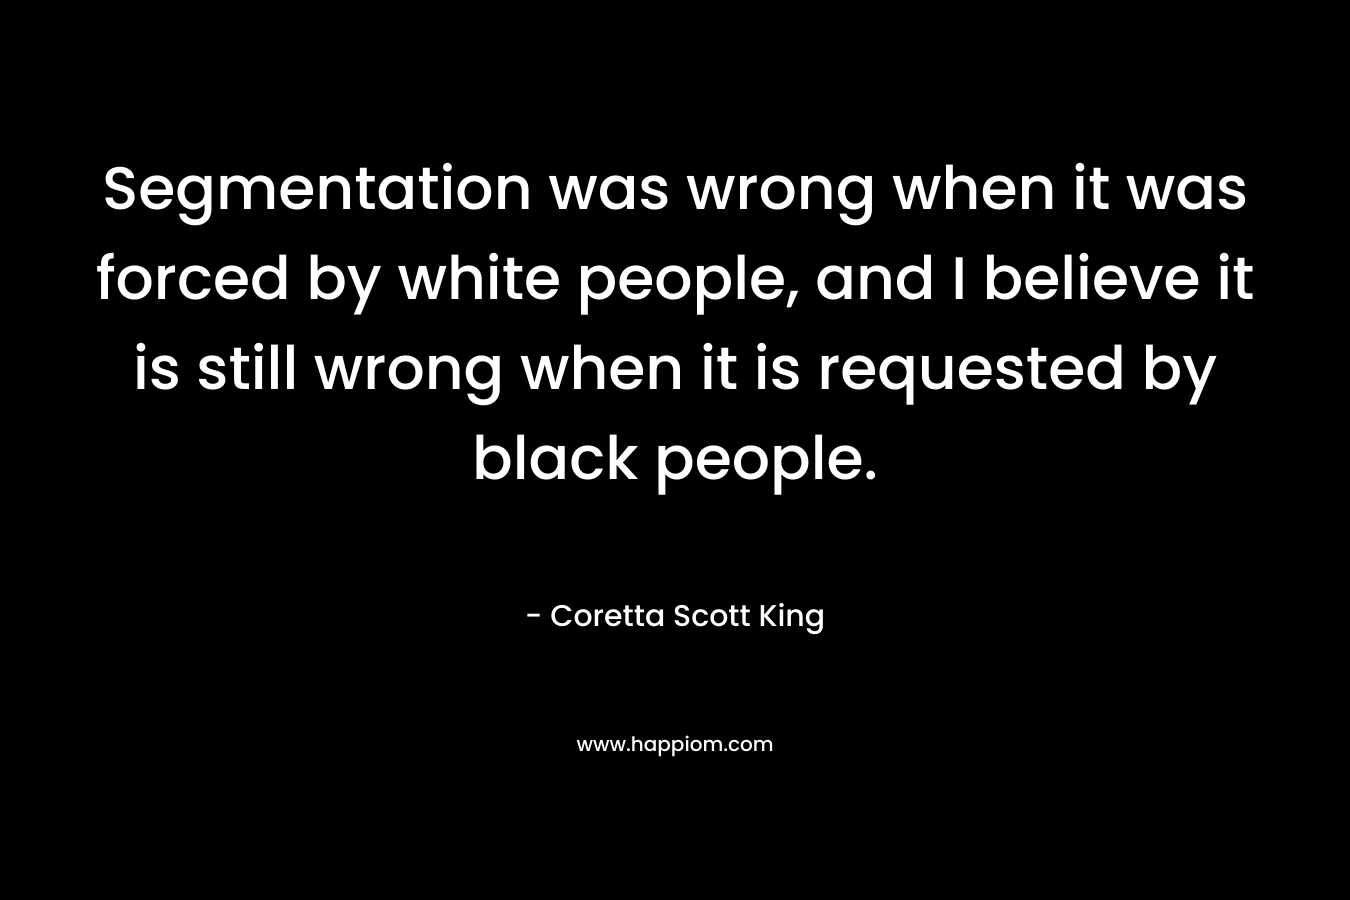 Segmentation was wrong when it was forced by white people, and I believe it is still wrong when it is requested by black people.